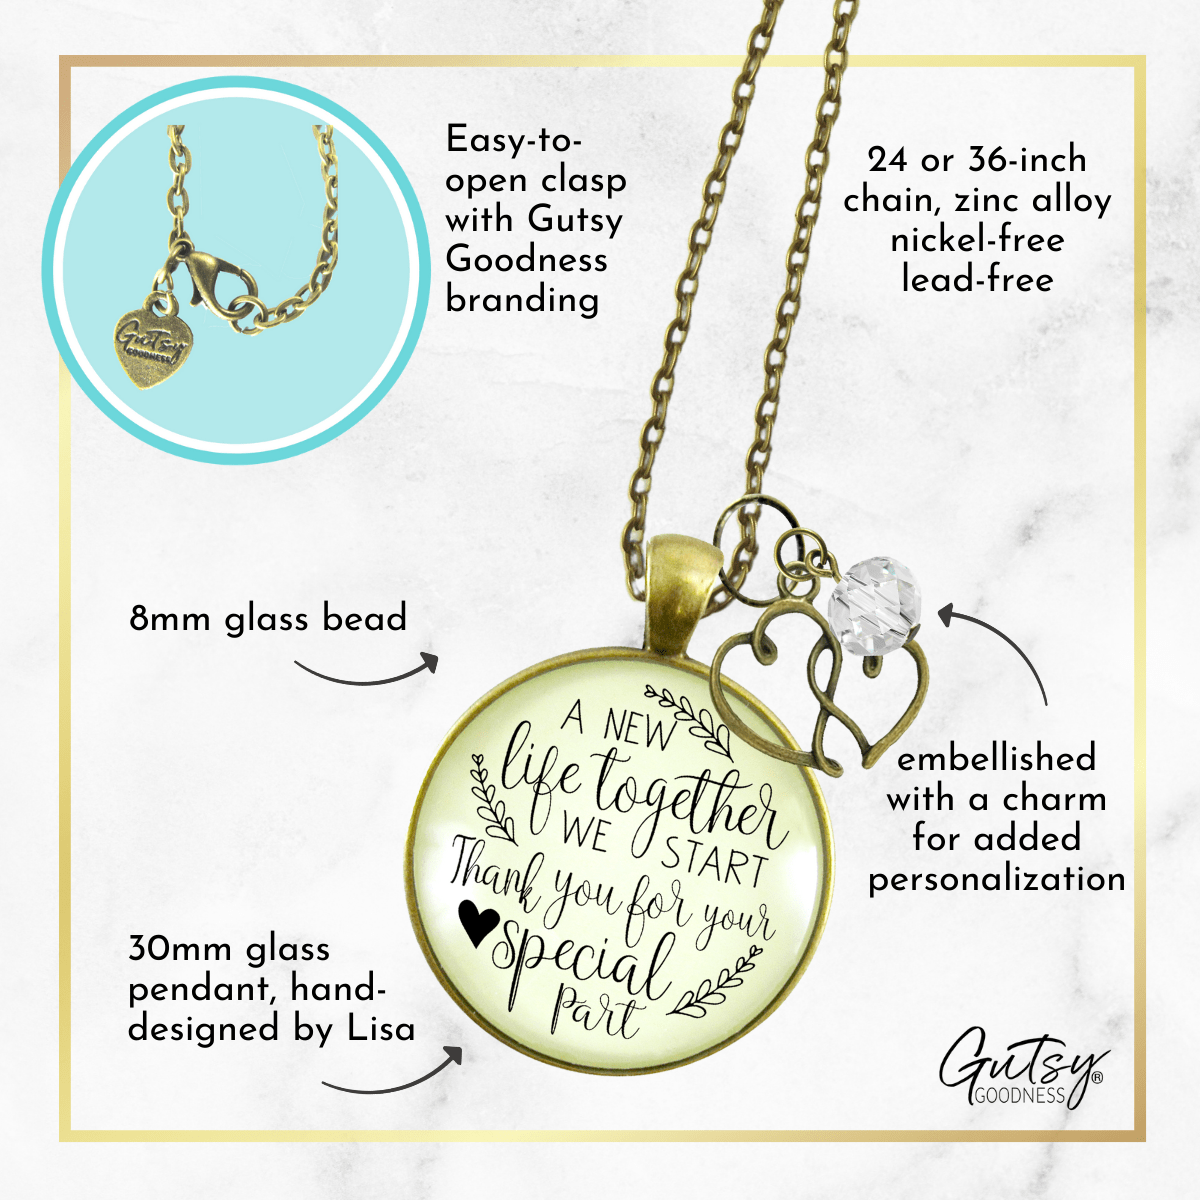 Gutsy Goodness Wedding Officiant Gift Necklace A New Life Heart Charm Thank You - Gutsy Goodness Handmade Jewelry;Wedding Officiant Gift Necklace A New Life Heart Charm Thank You - Gutsy Goodness Handmade Jewelry Gifts